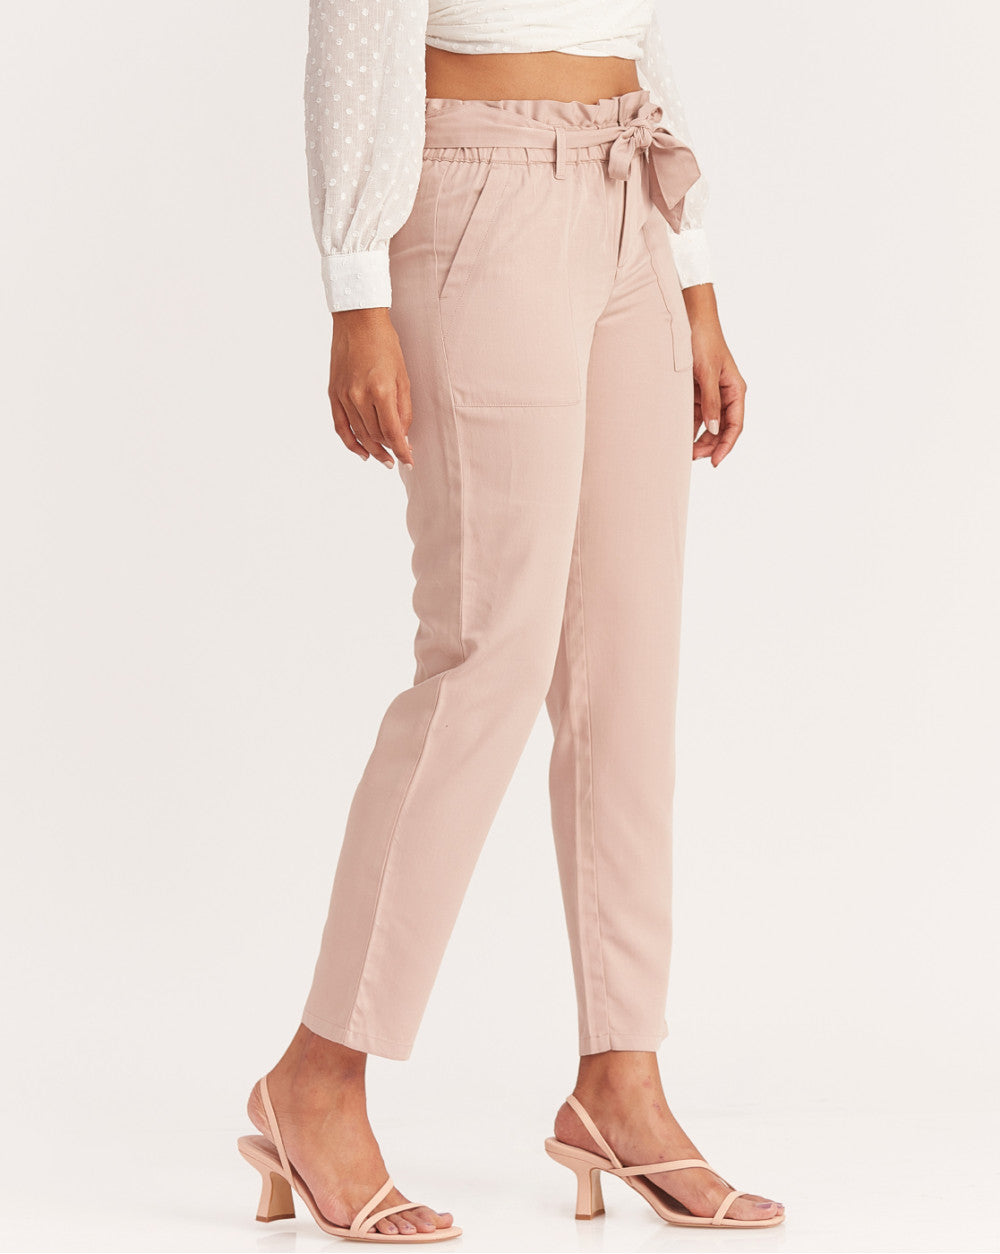 Tapered Fit Paperbag Drapey Pants With Tie-Up - Rose Pink